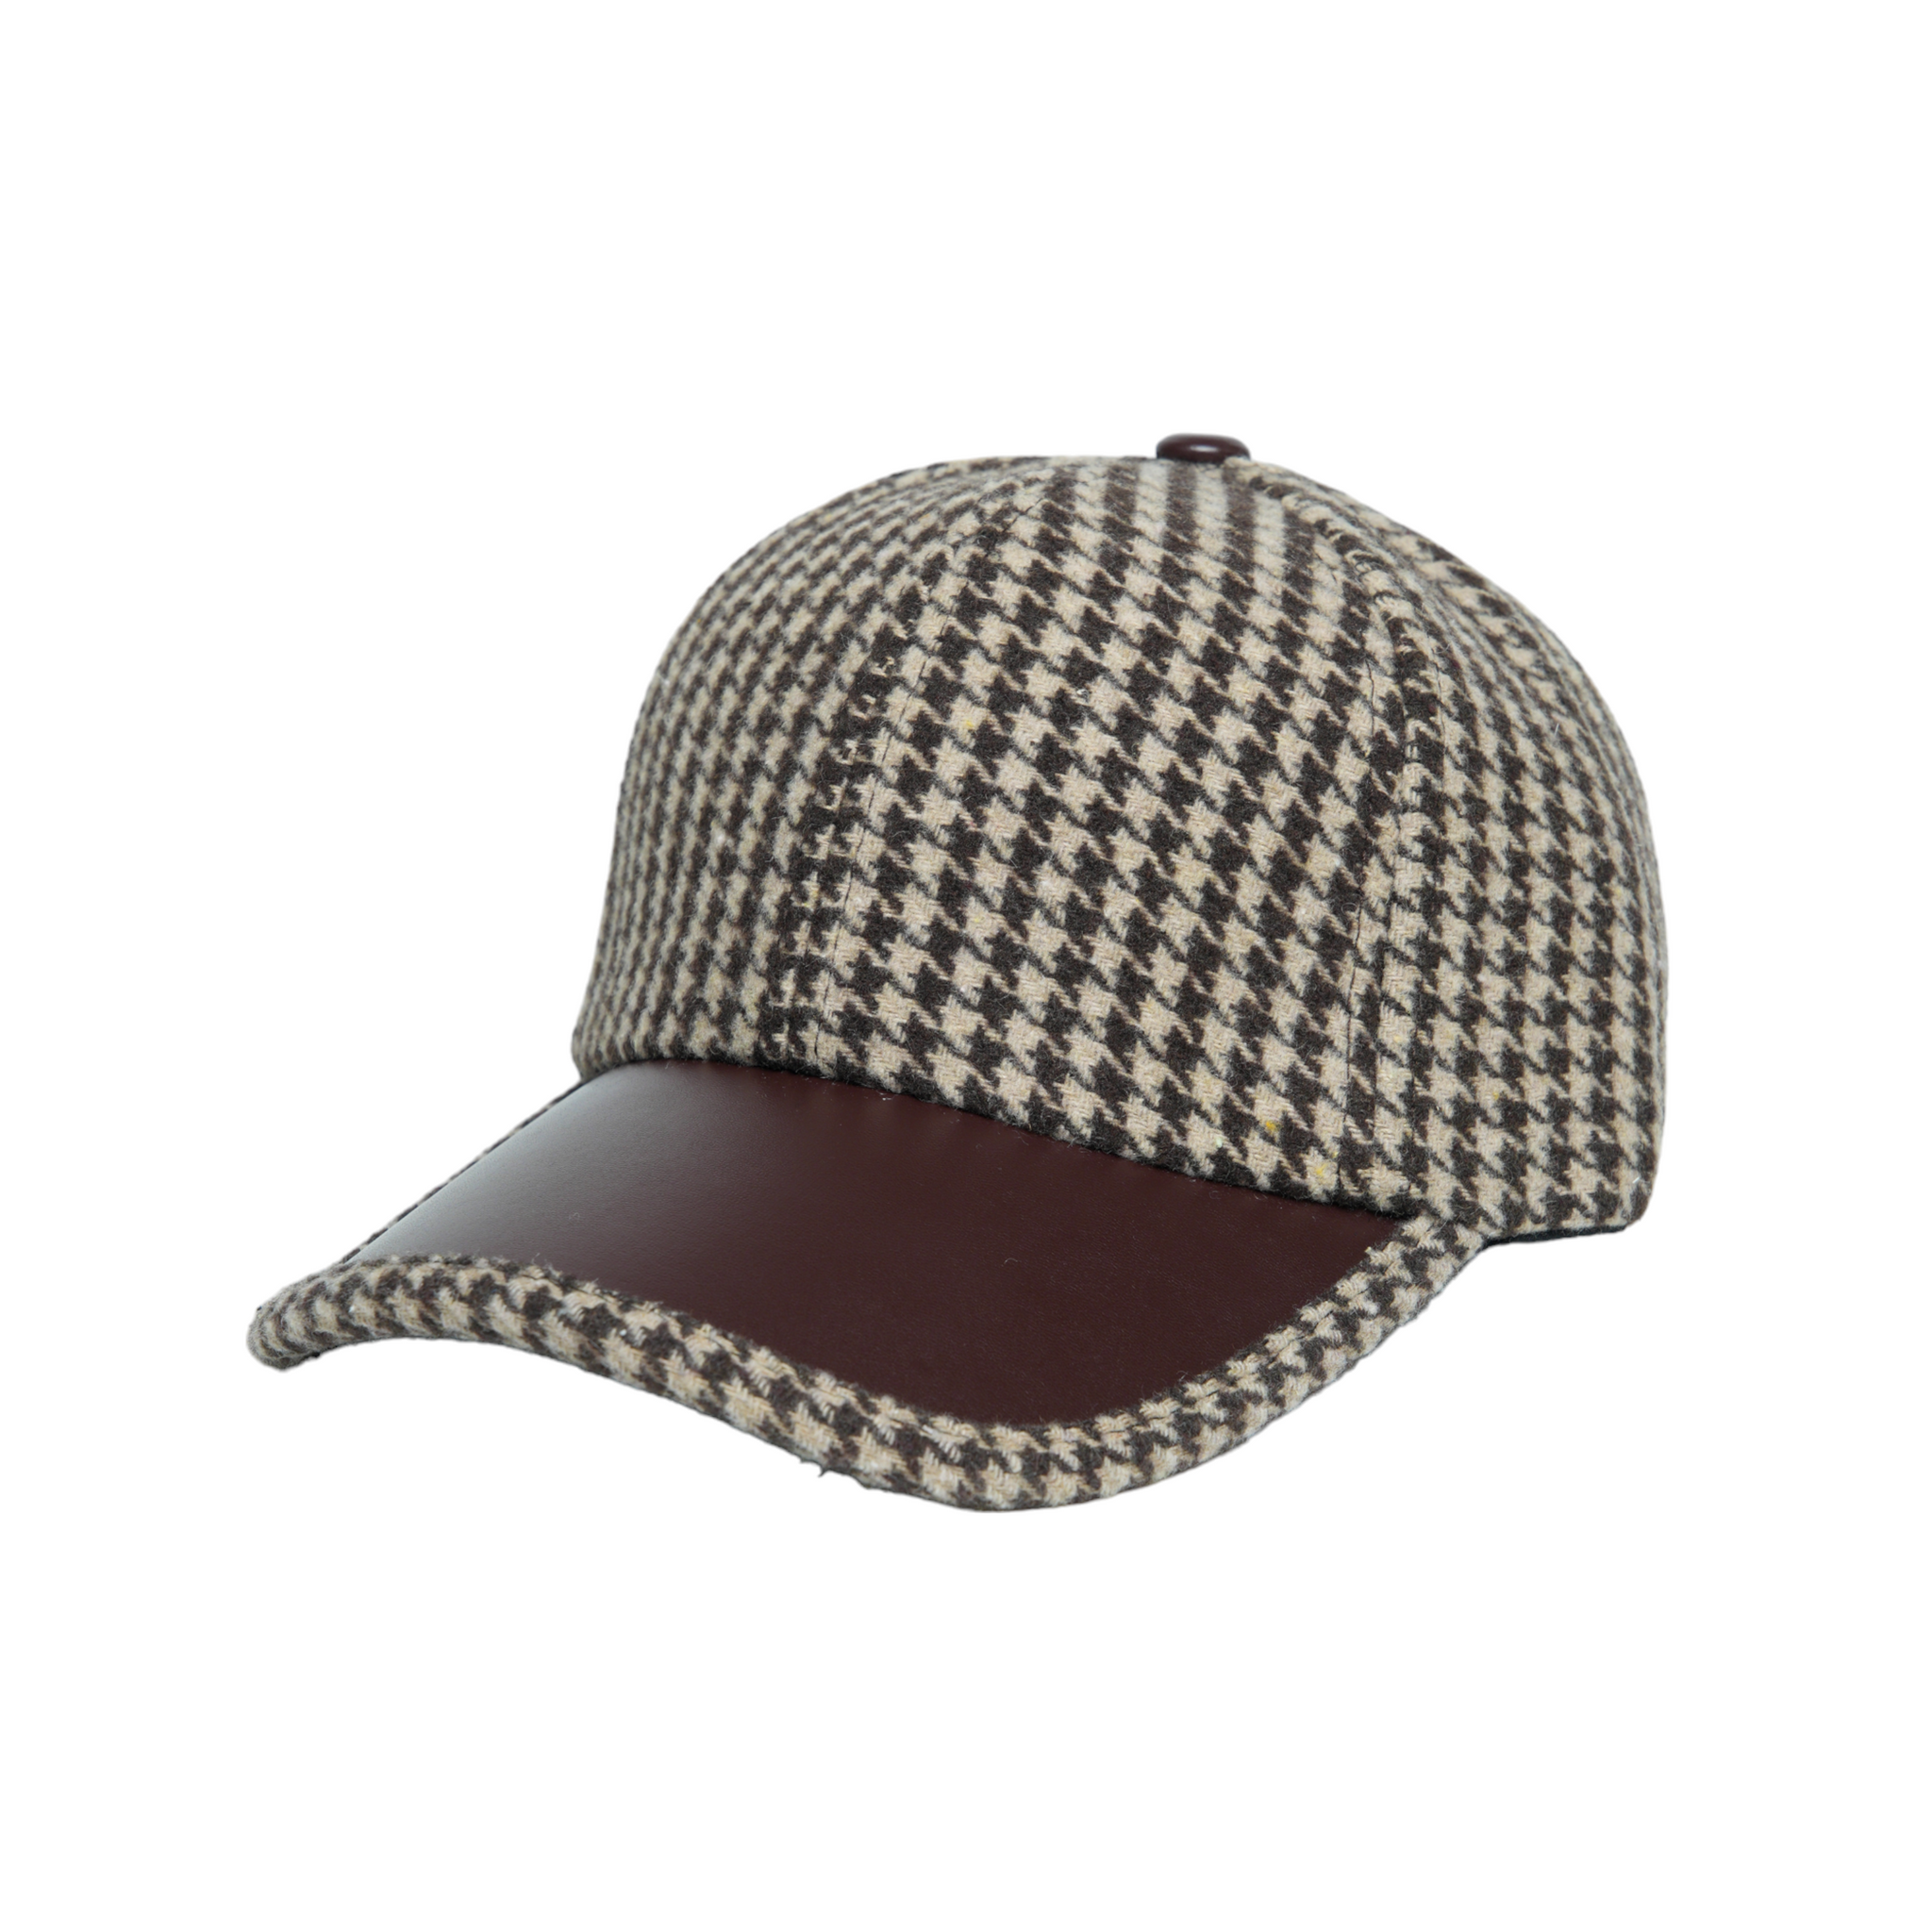 Chokore Retro Houndstooth Pattern Baseball Cap with Leather Details (Coffee)